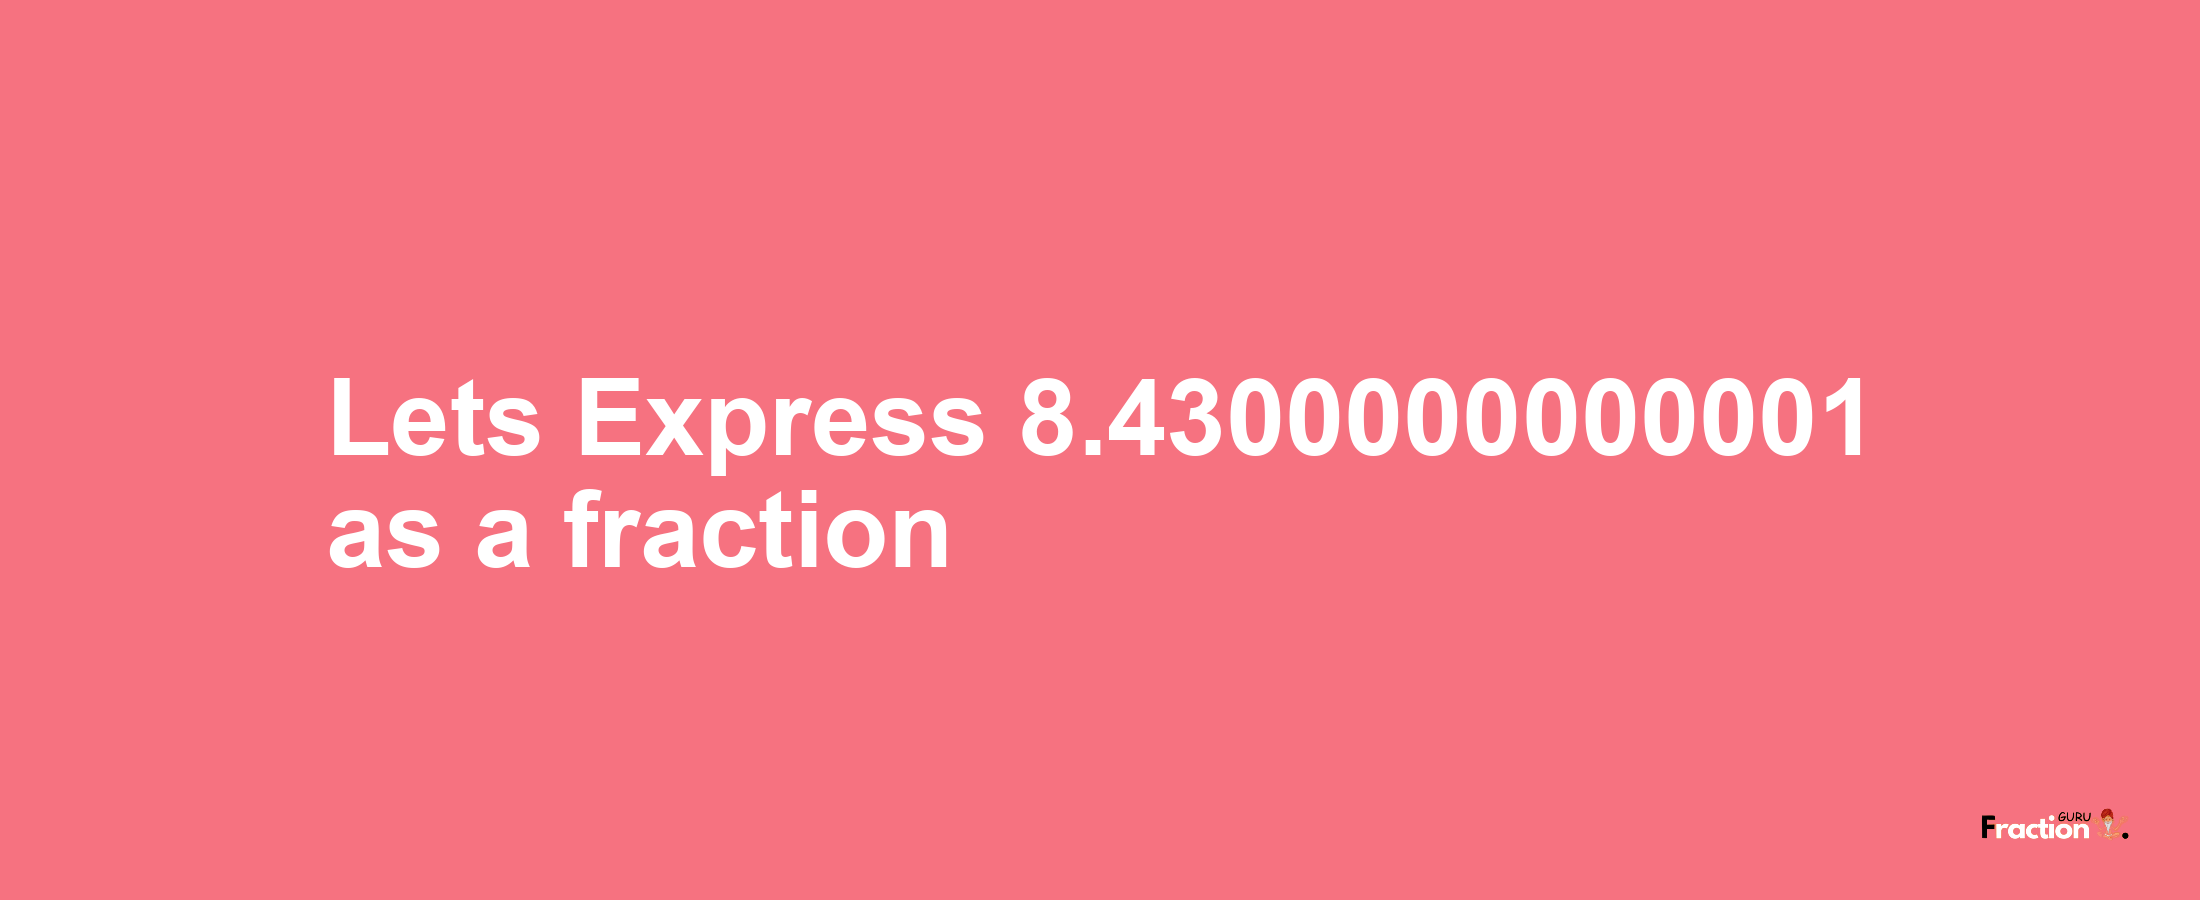 Lets Express 8.4300000000001 as afraction